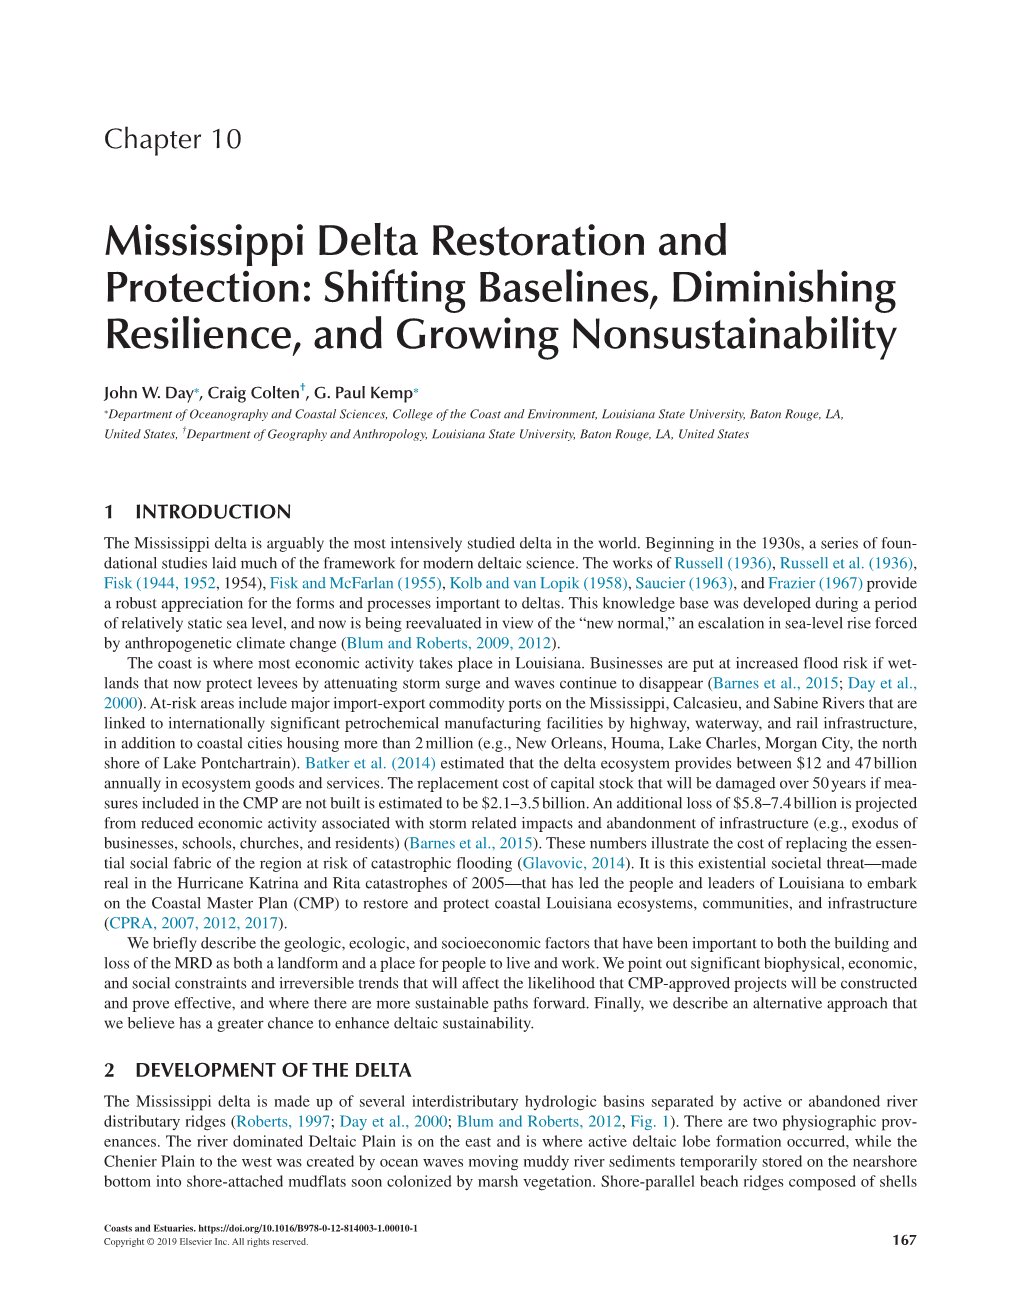 Mississippi Delta Restoration and Protection: Shifting Baselines, Diminishing Resilience, and Growing Nonsustainability